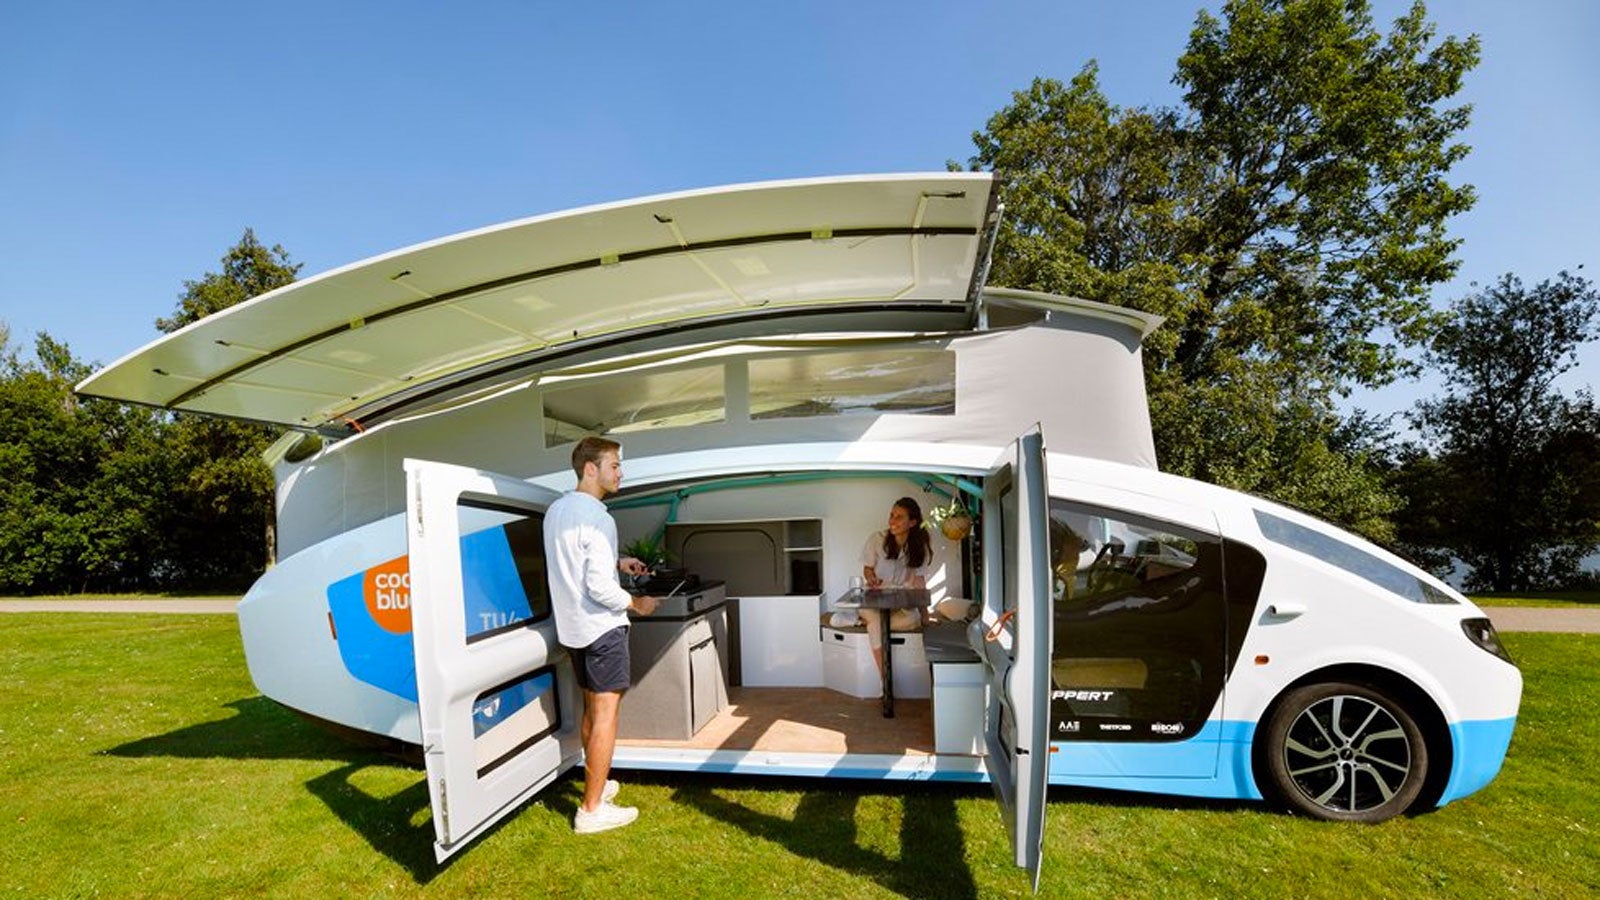 Chase the Sun in This Solar-Powered RV